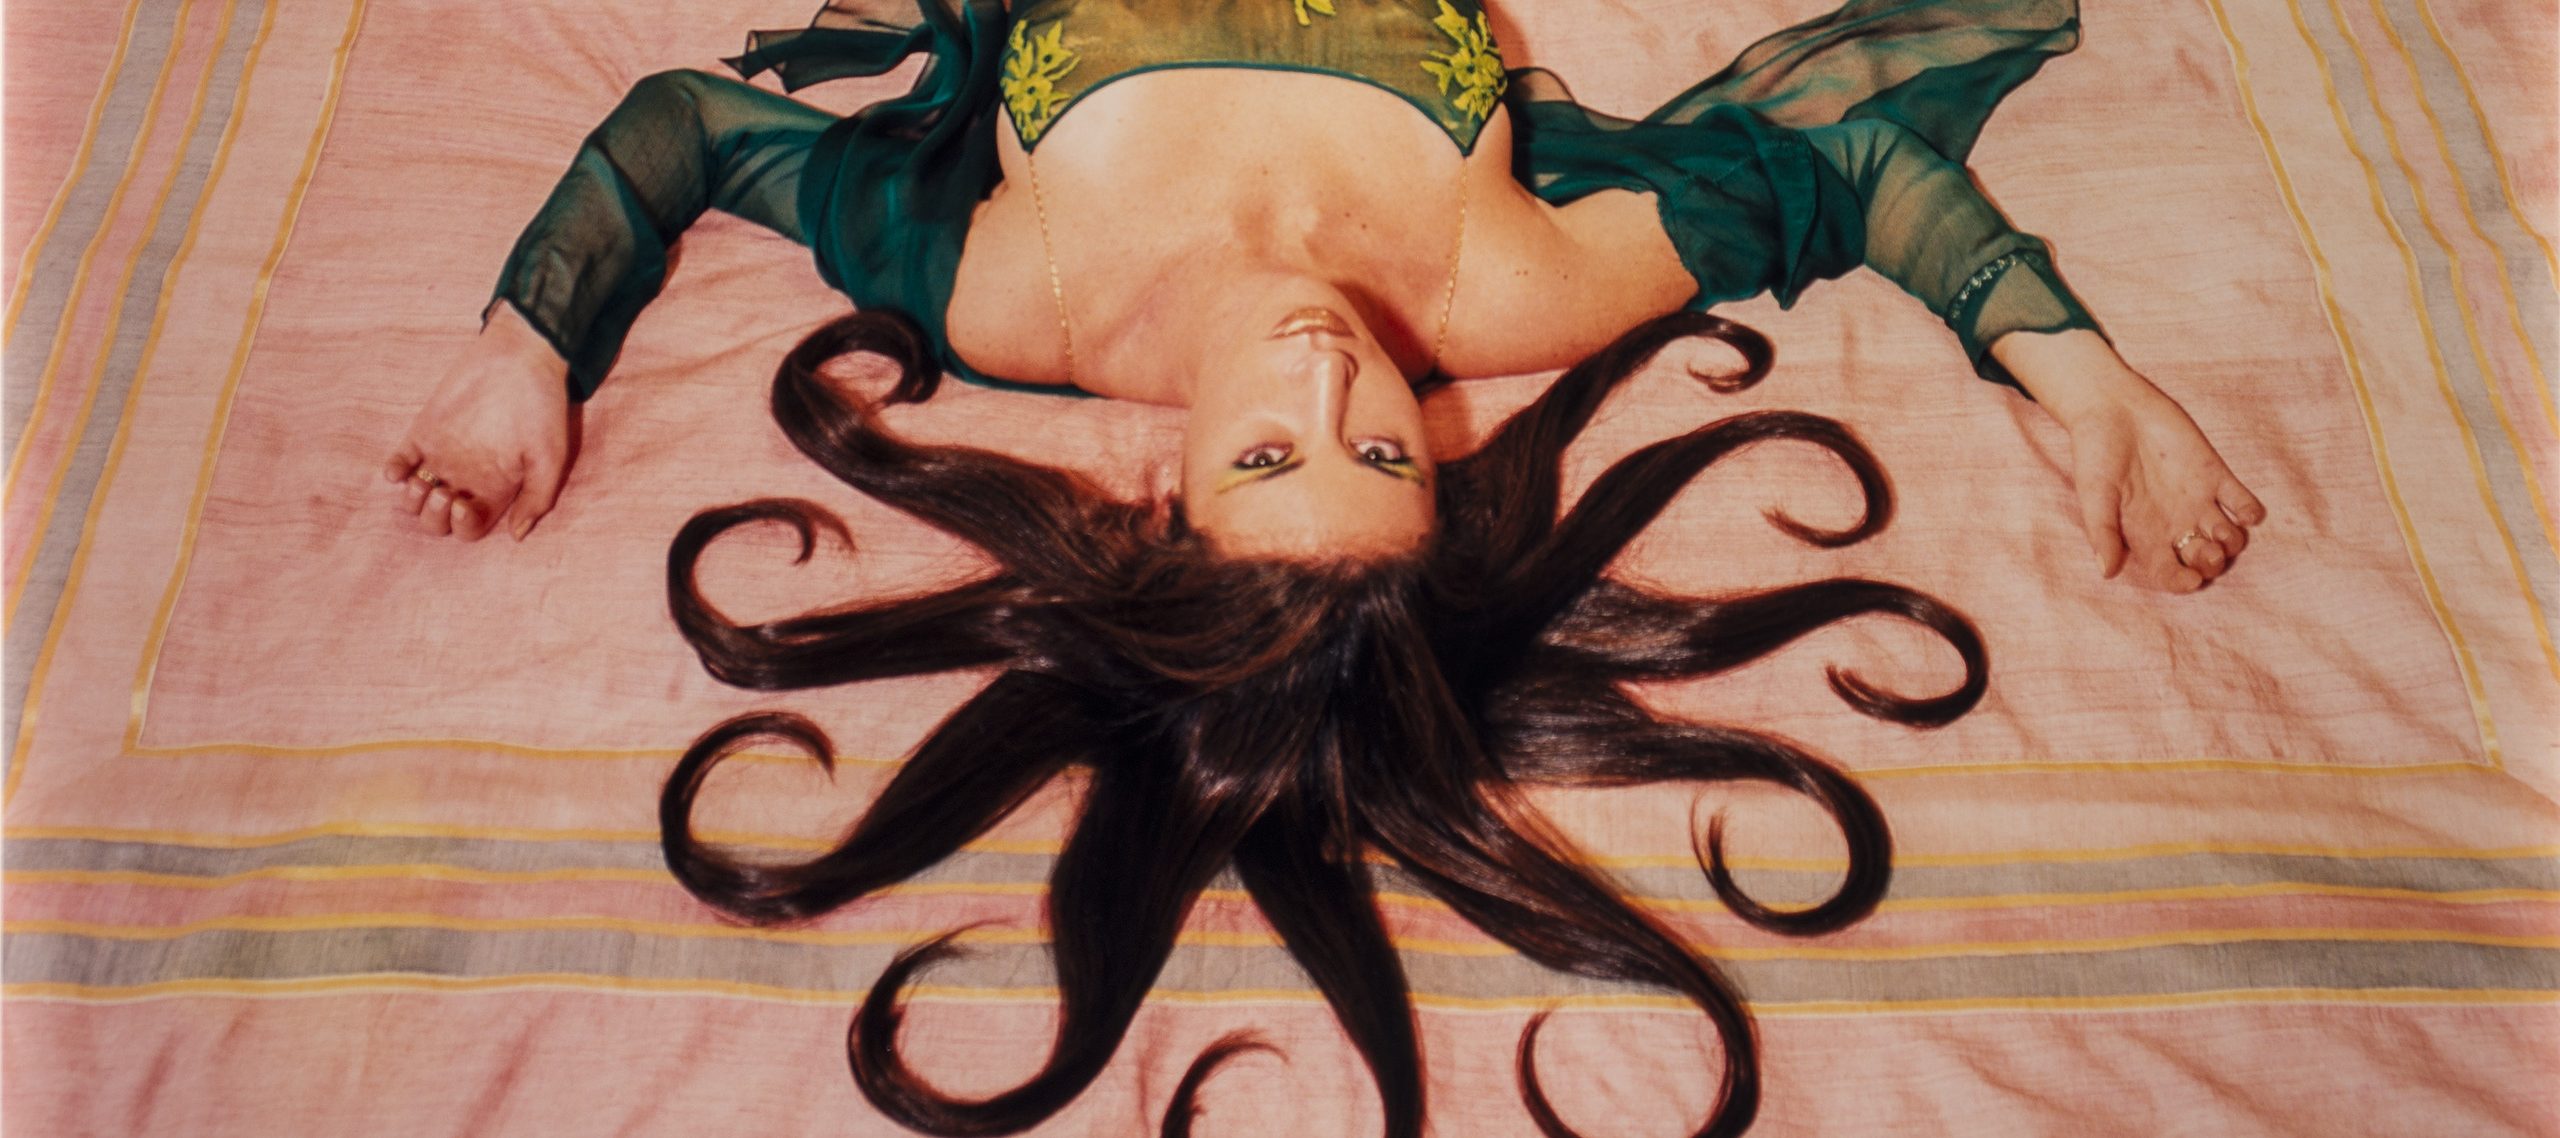 A slim, light-skinned woman wearing a long, emerald-green dress gazes up at the viewer from the foot of the bed, her bare feet near the headboard. Brown hair radiates from her head in 10 curled, snake-like segments. Her arms, bent at the elbows, extend from her body to form a W.